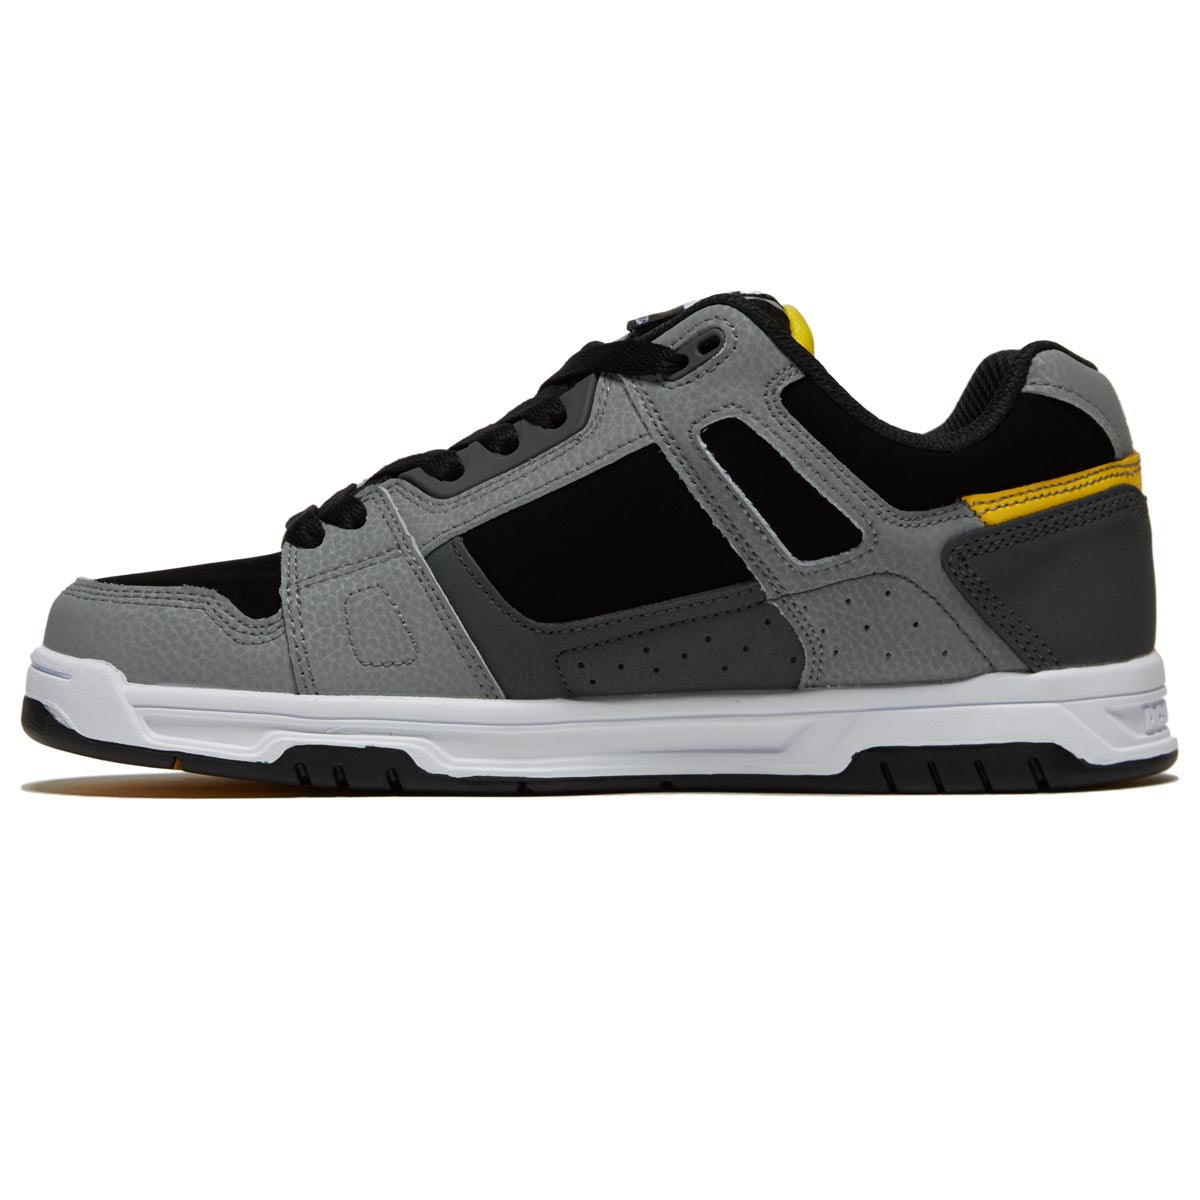 DC Stag Shoes - Grey/Yellow image 2